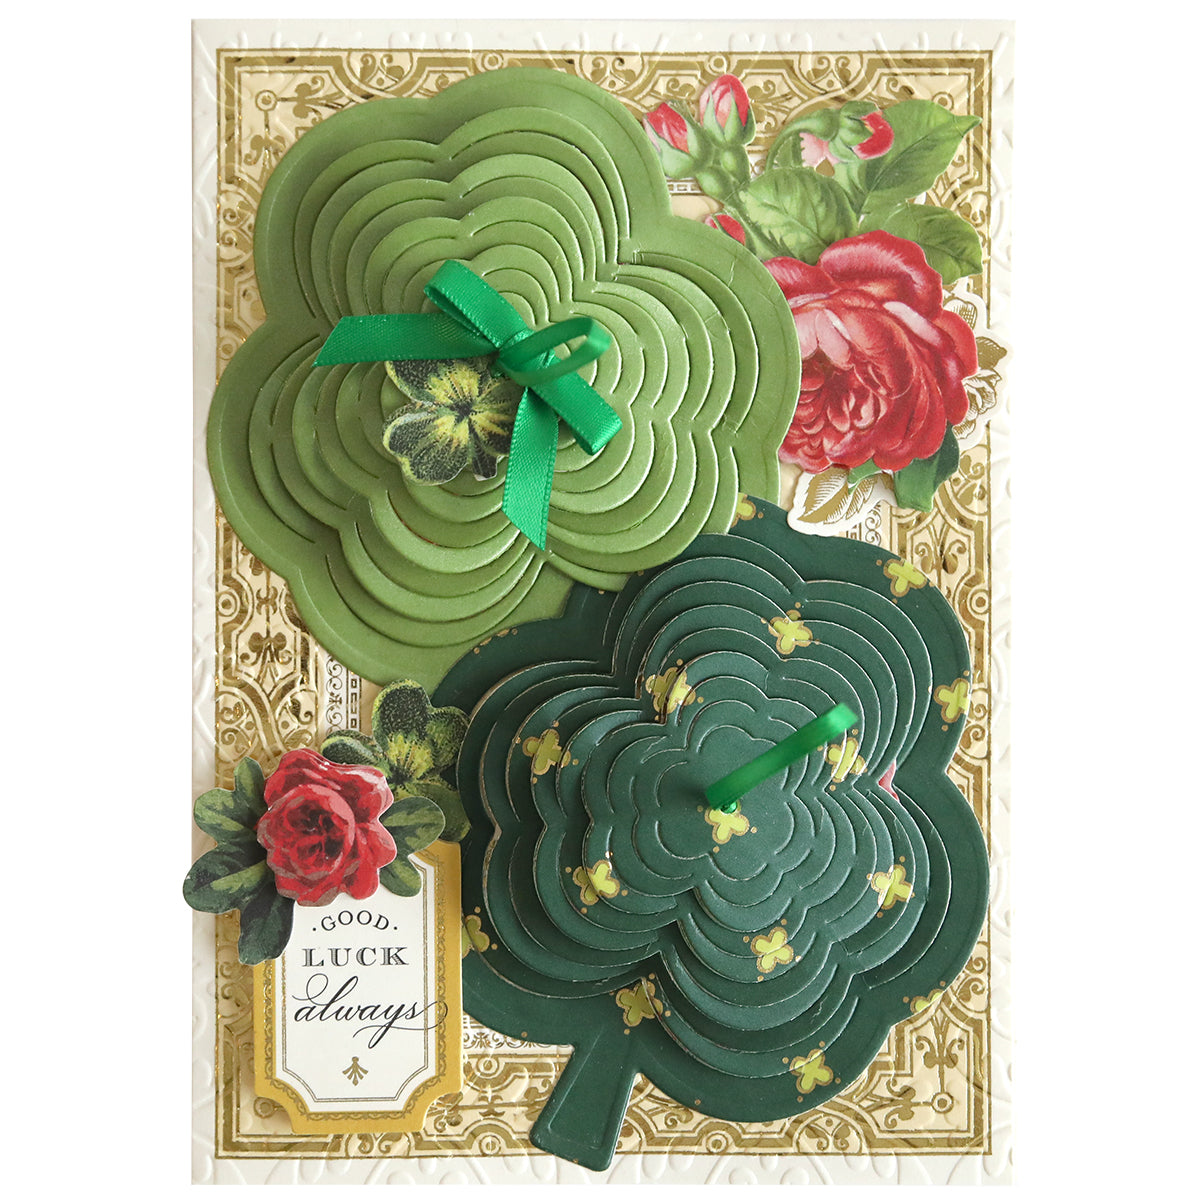 Celebrate St. Patrick's Day with a beautifully crafted card featuring shamrocks and roses, made using the Anna Griffin Empress Machine. Use the Shamrock Kirigami Dies for an